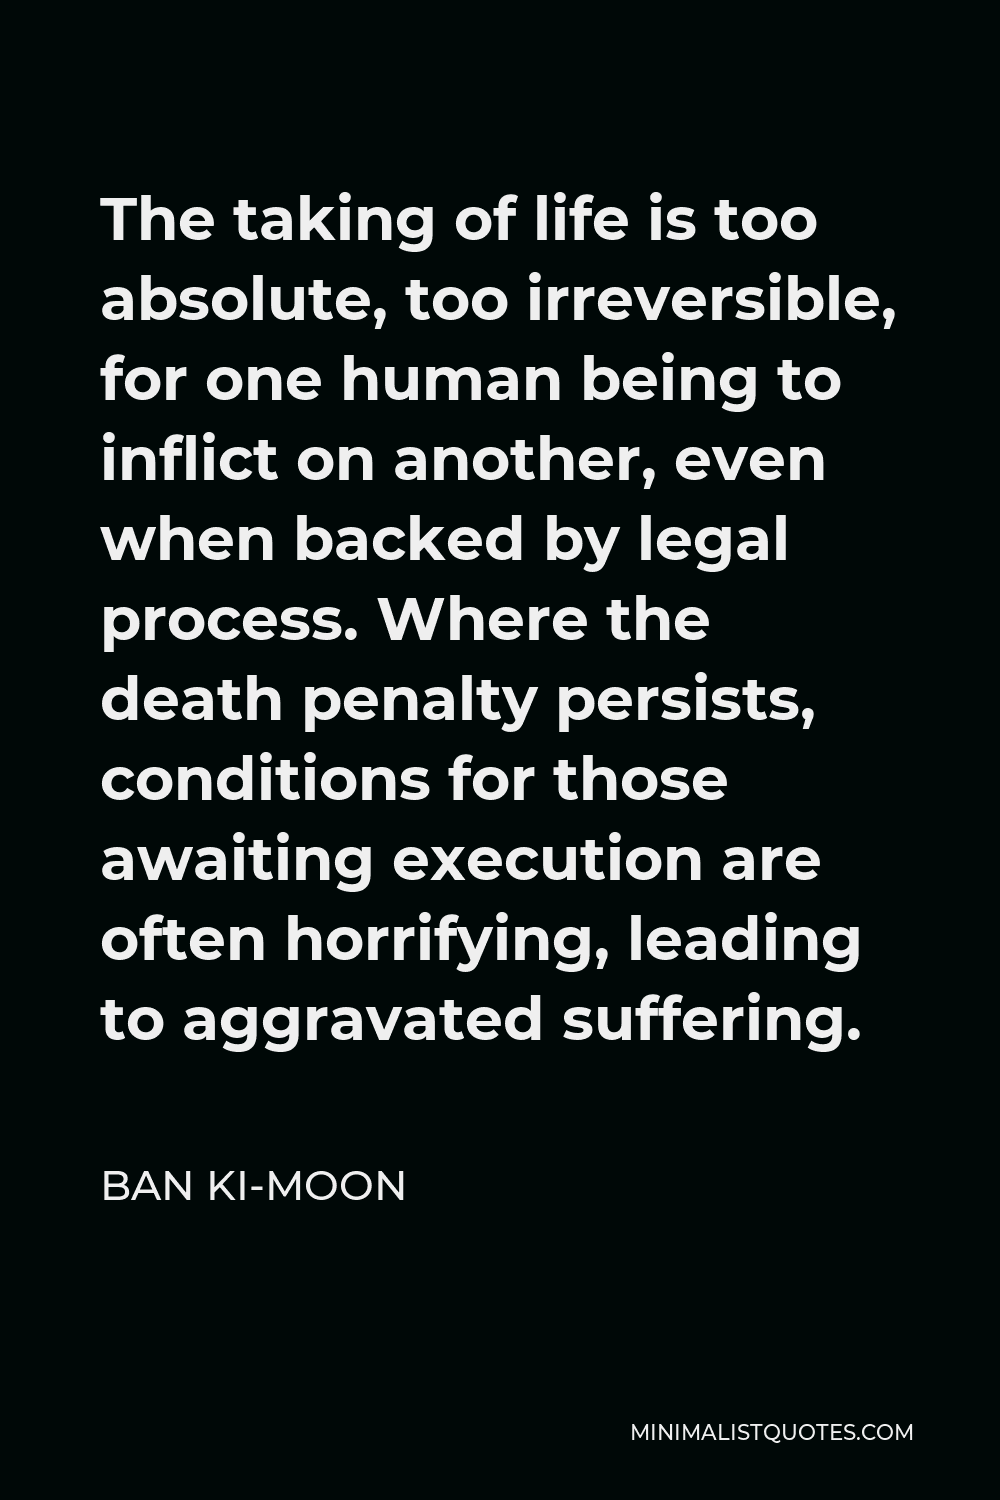 Ban Ki-moon Quote - The taking of life is too absolute, too irreversible, for one human being to inflict on another, even when backed by legal process. Where the death penalty persists, conditions for those awaiting execution are often horrifying, leading to aggravated suffering.